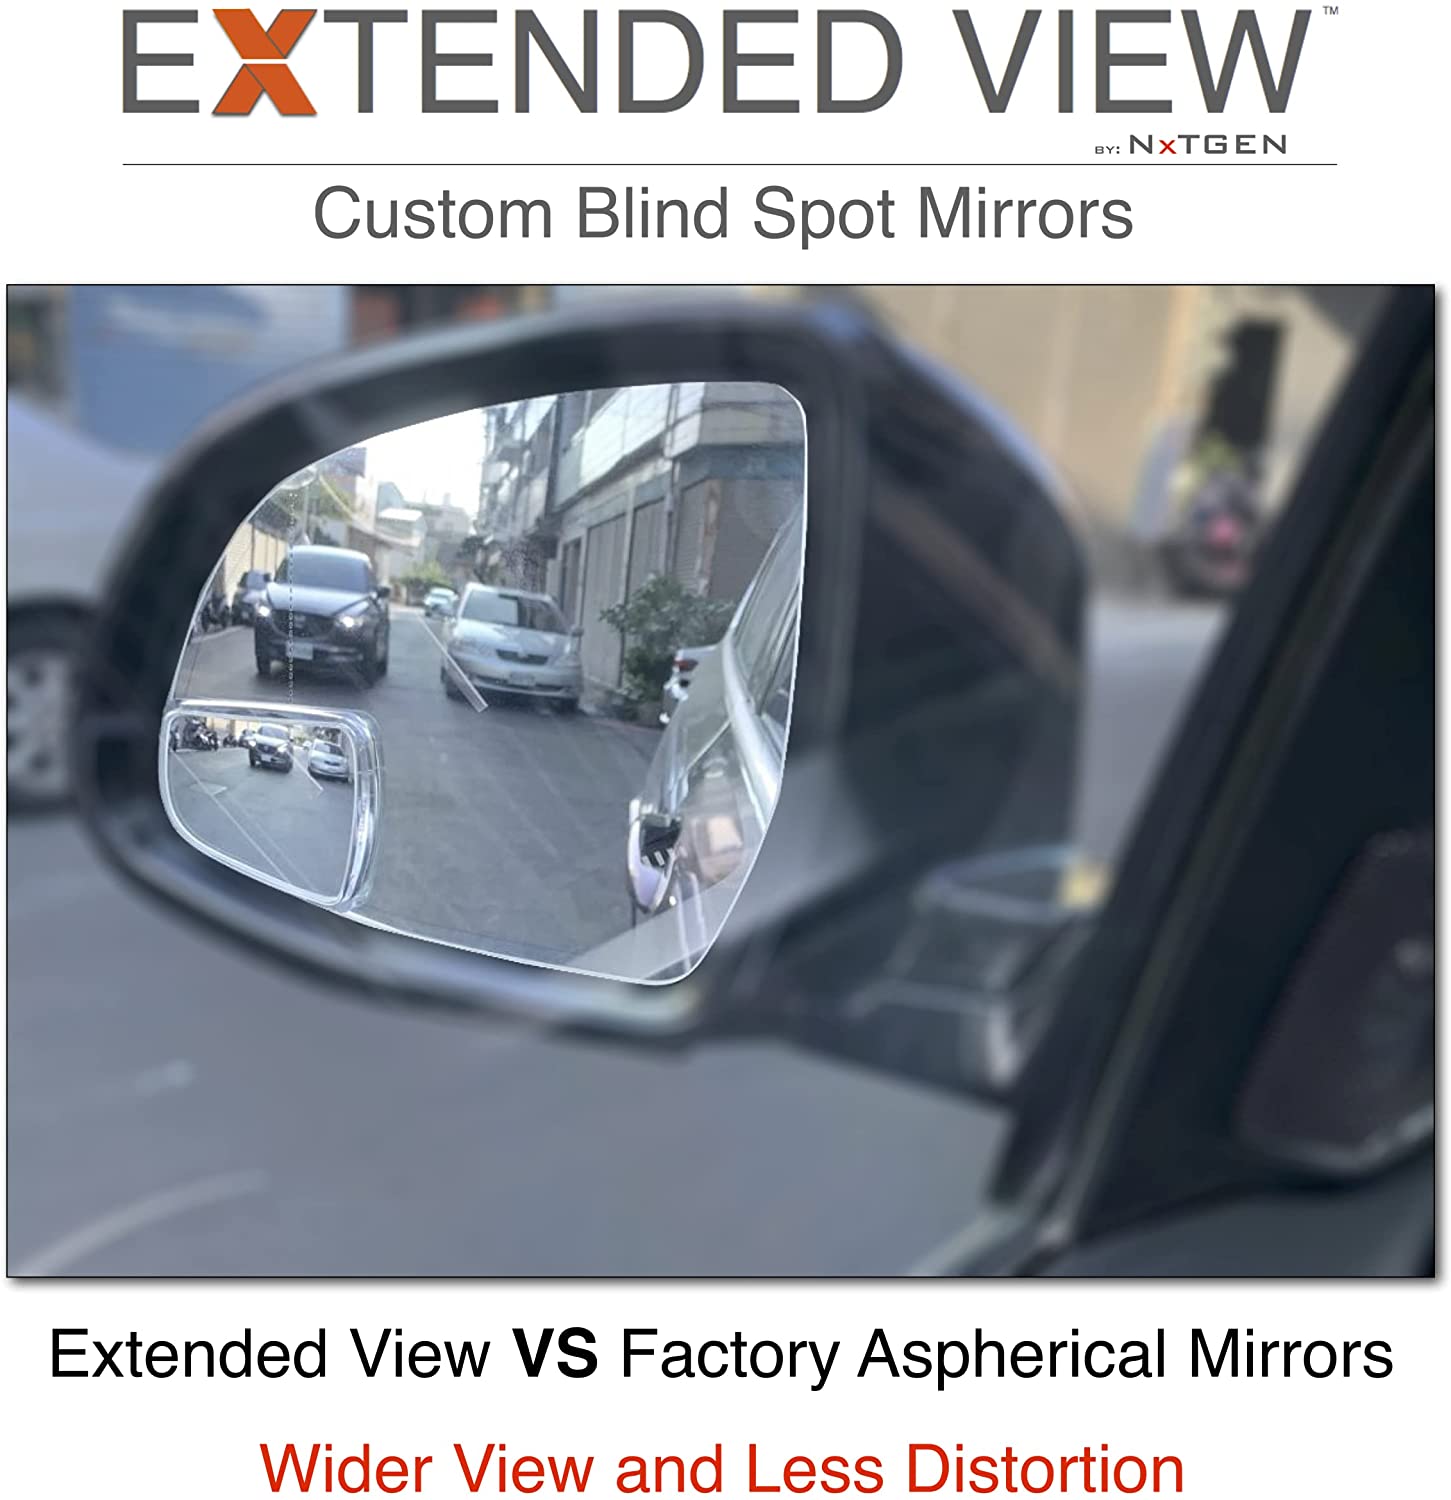 BMW X4 Blind Spot Mirrors | Extended View™